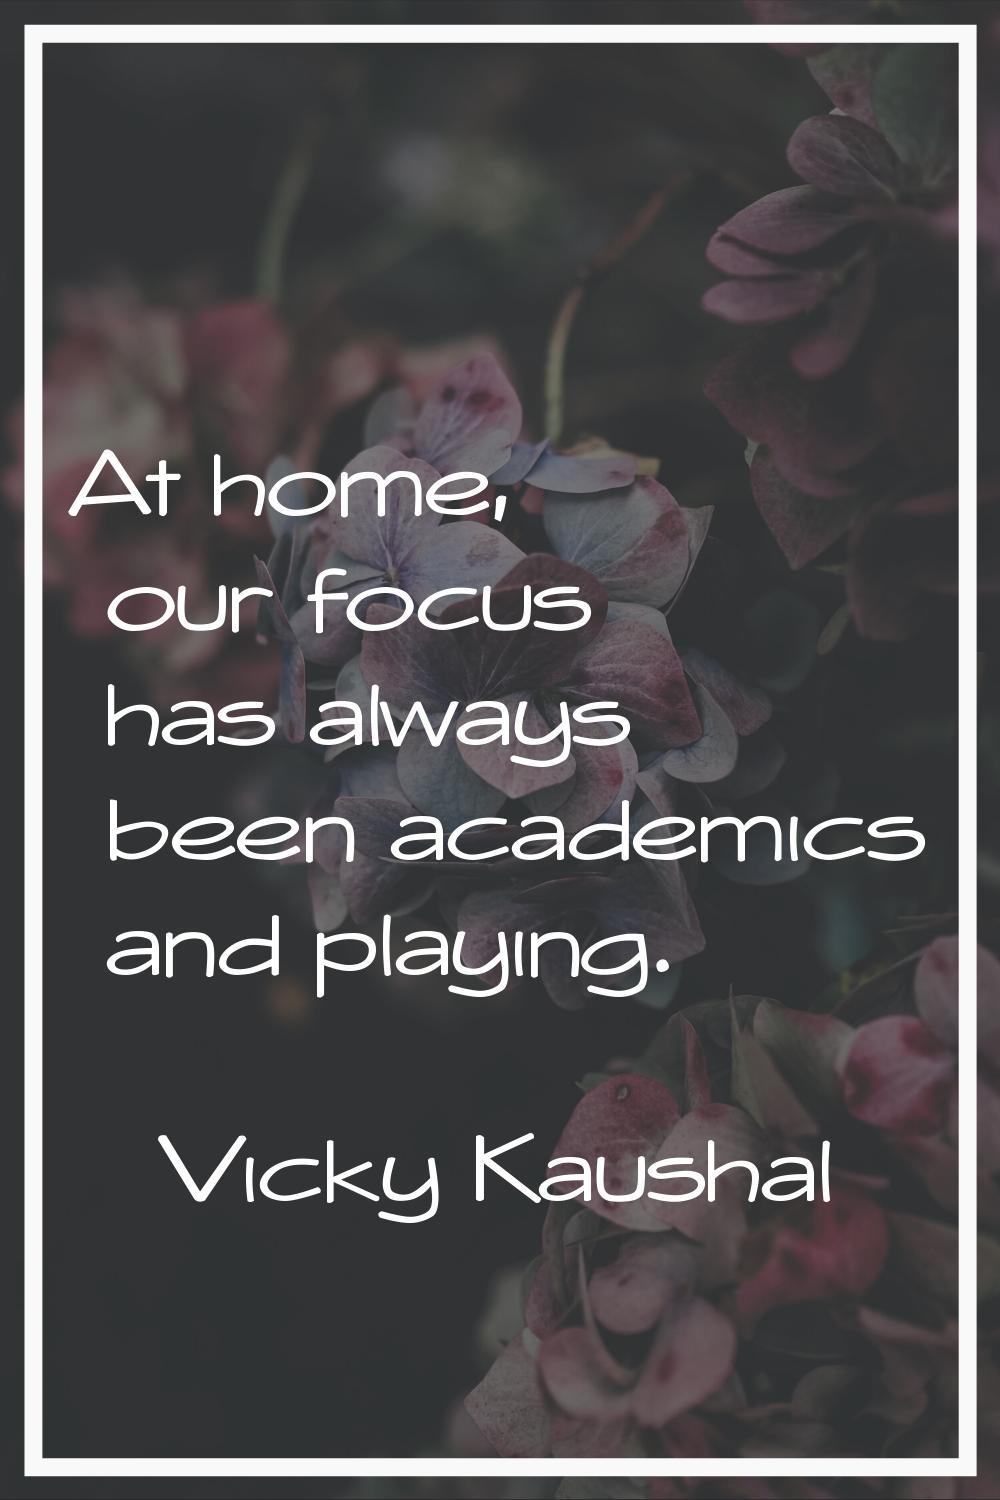 At home, our focus has always been academics and playing.